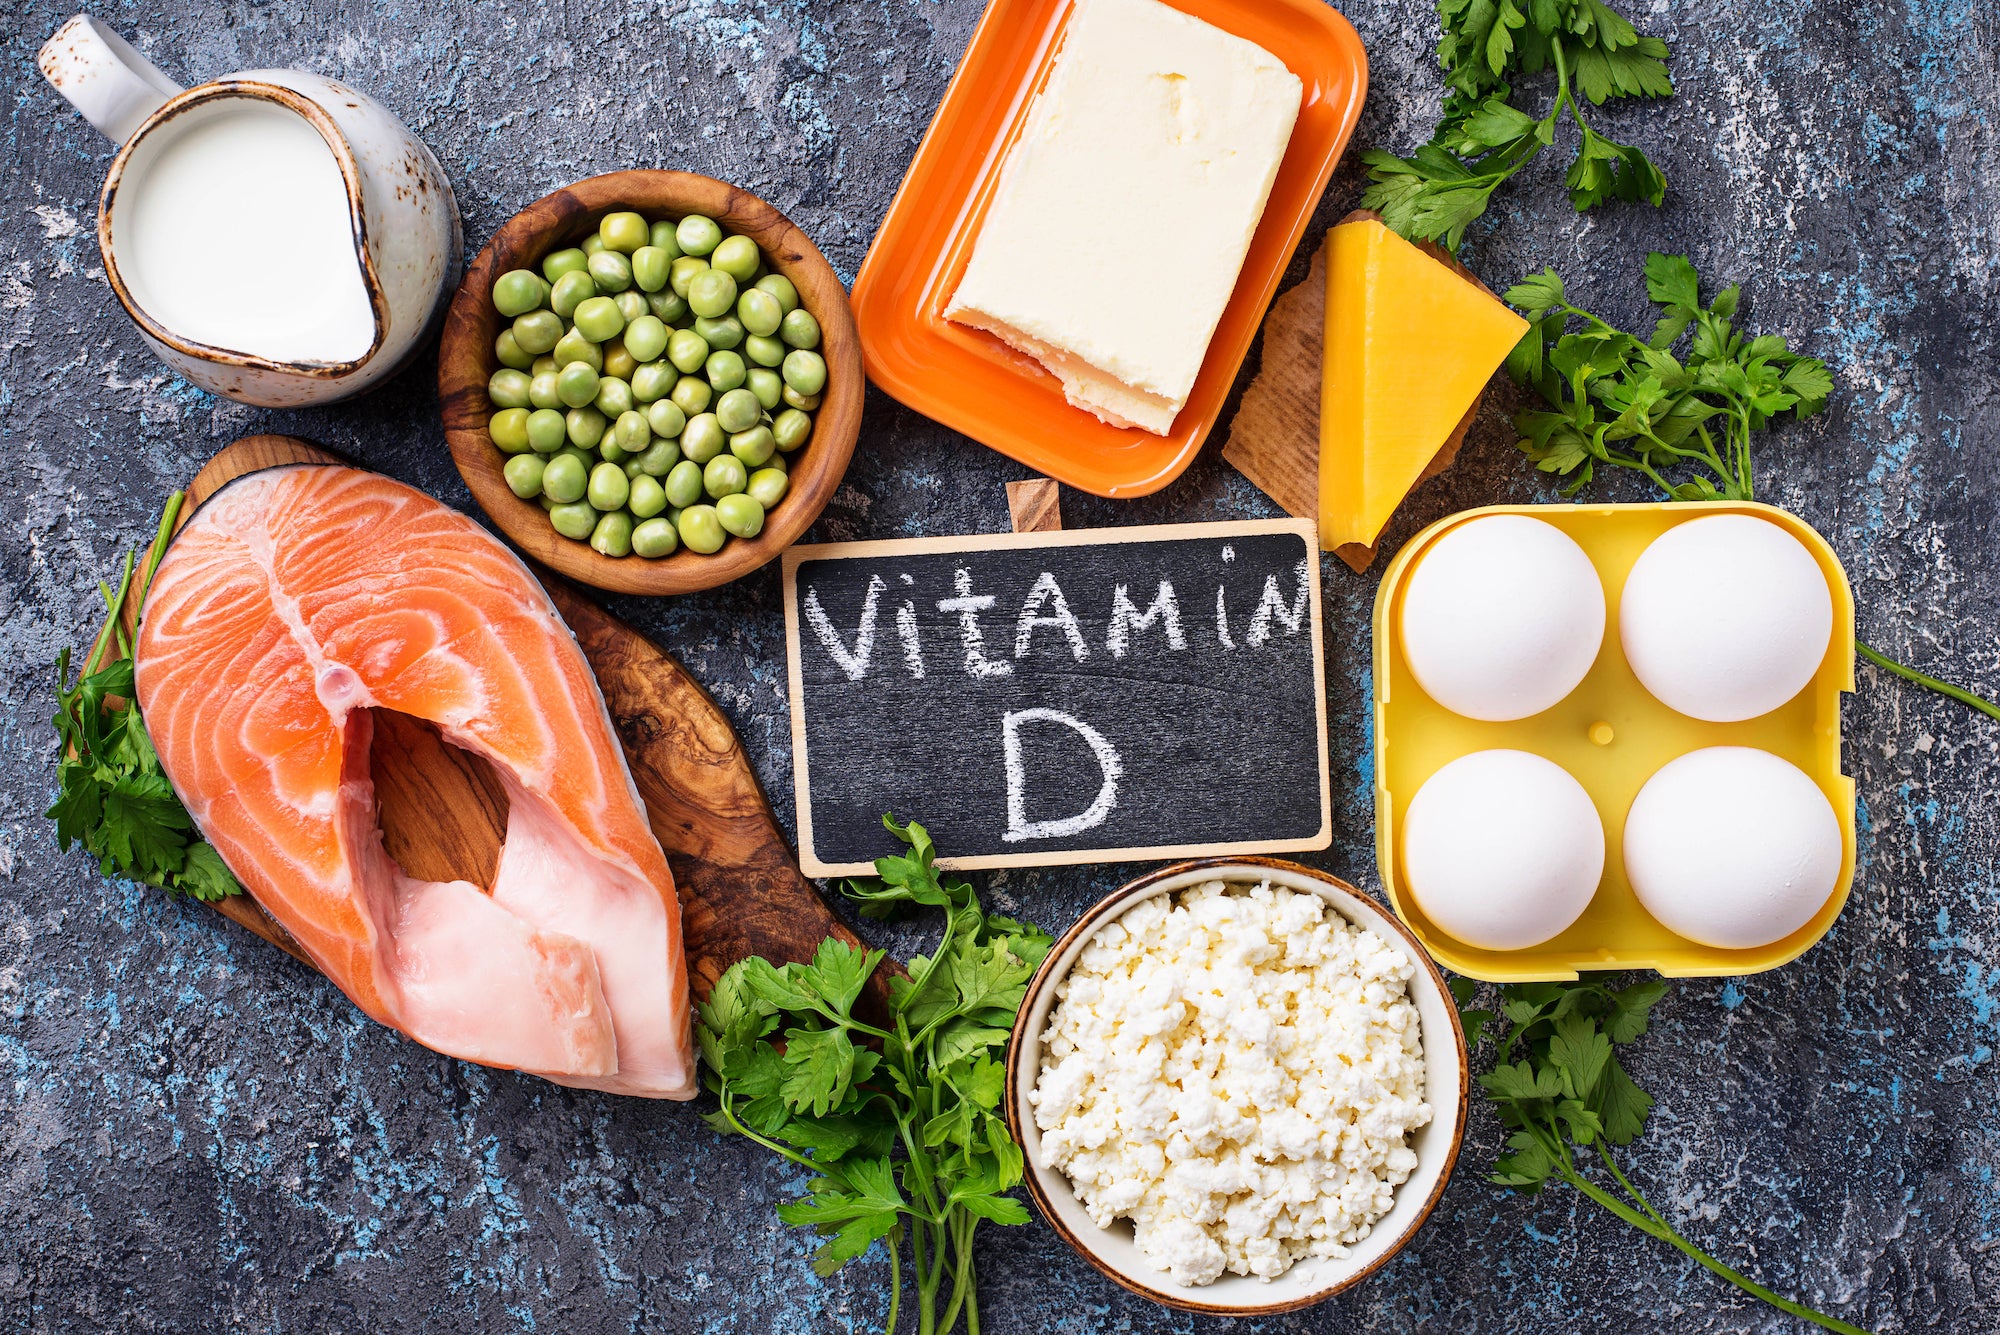 50% of Danes lack vitamin D - Are you getting enough?